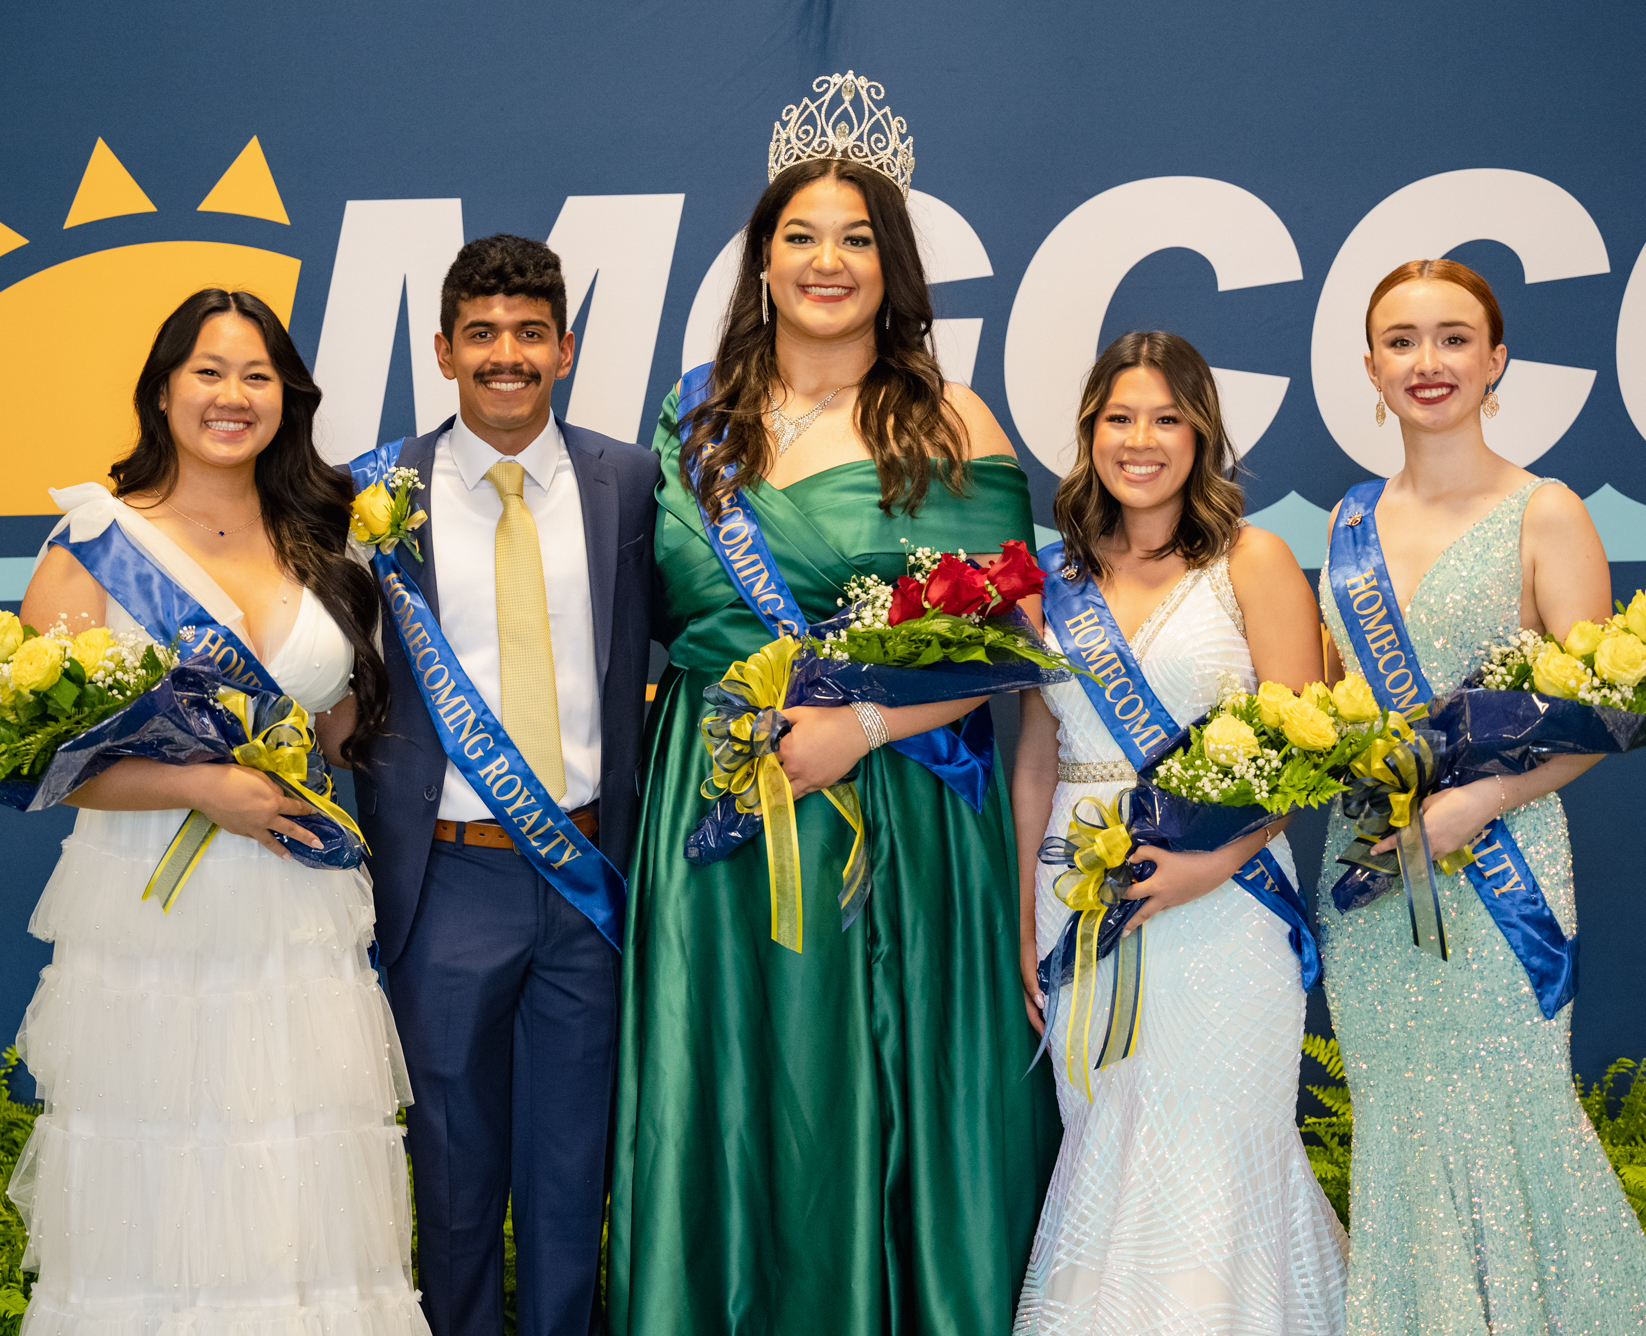 Harrison County Campus Royalty, from left, are Hannah Nguyen, freshman royalty; Norberto Lopez, sophomore royalty; Queen Victoria Robinson; Hannah Necaise, sophomore royalty; and Darby Felton, freshman royalty. 